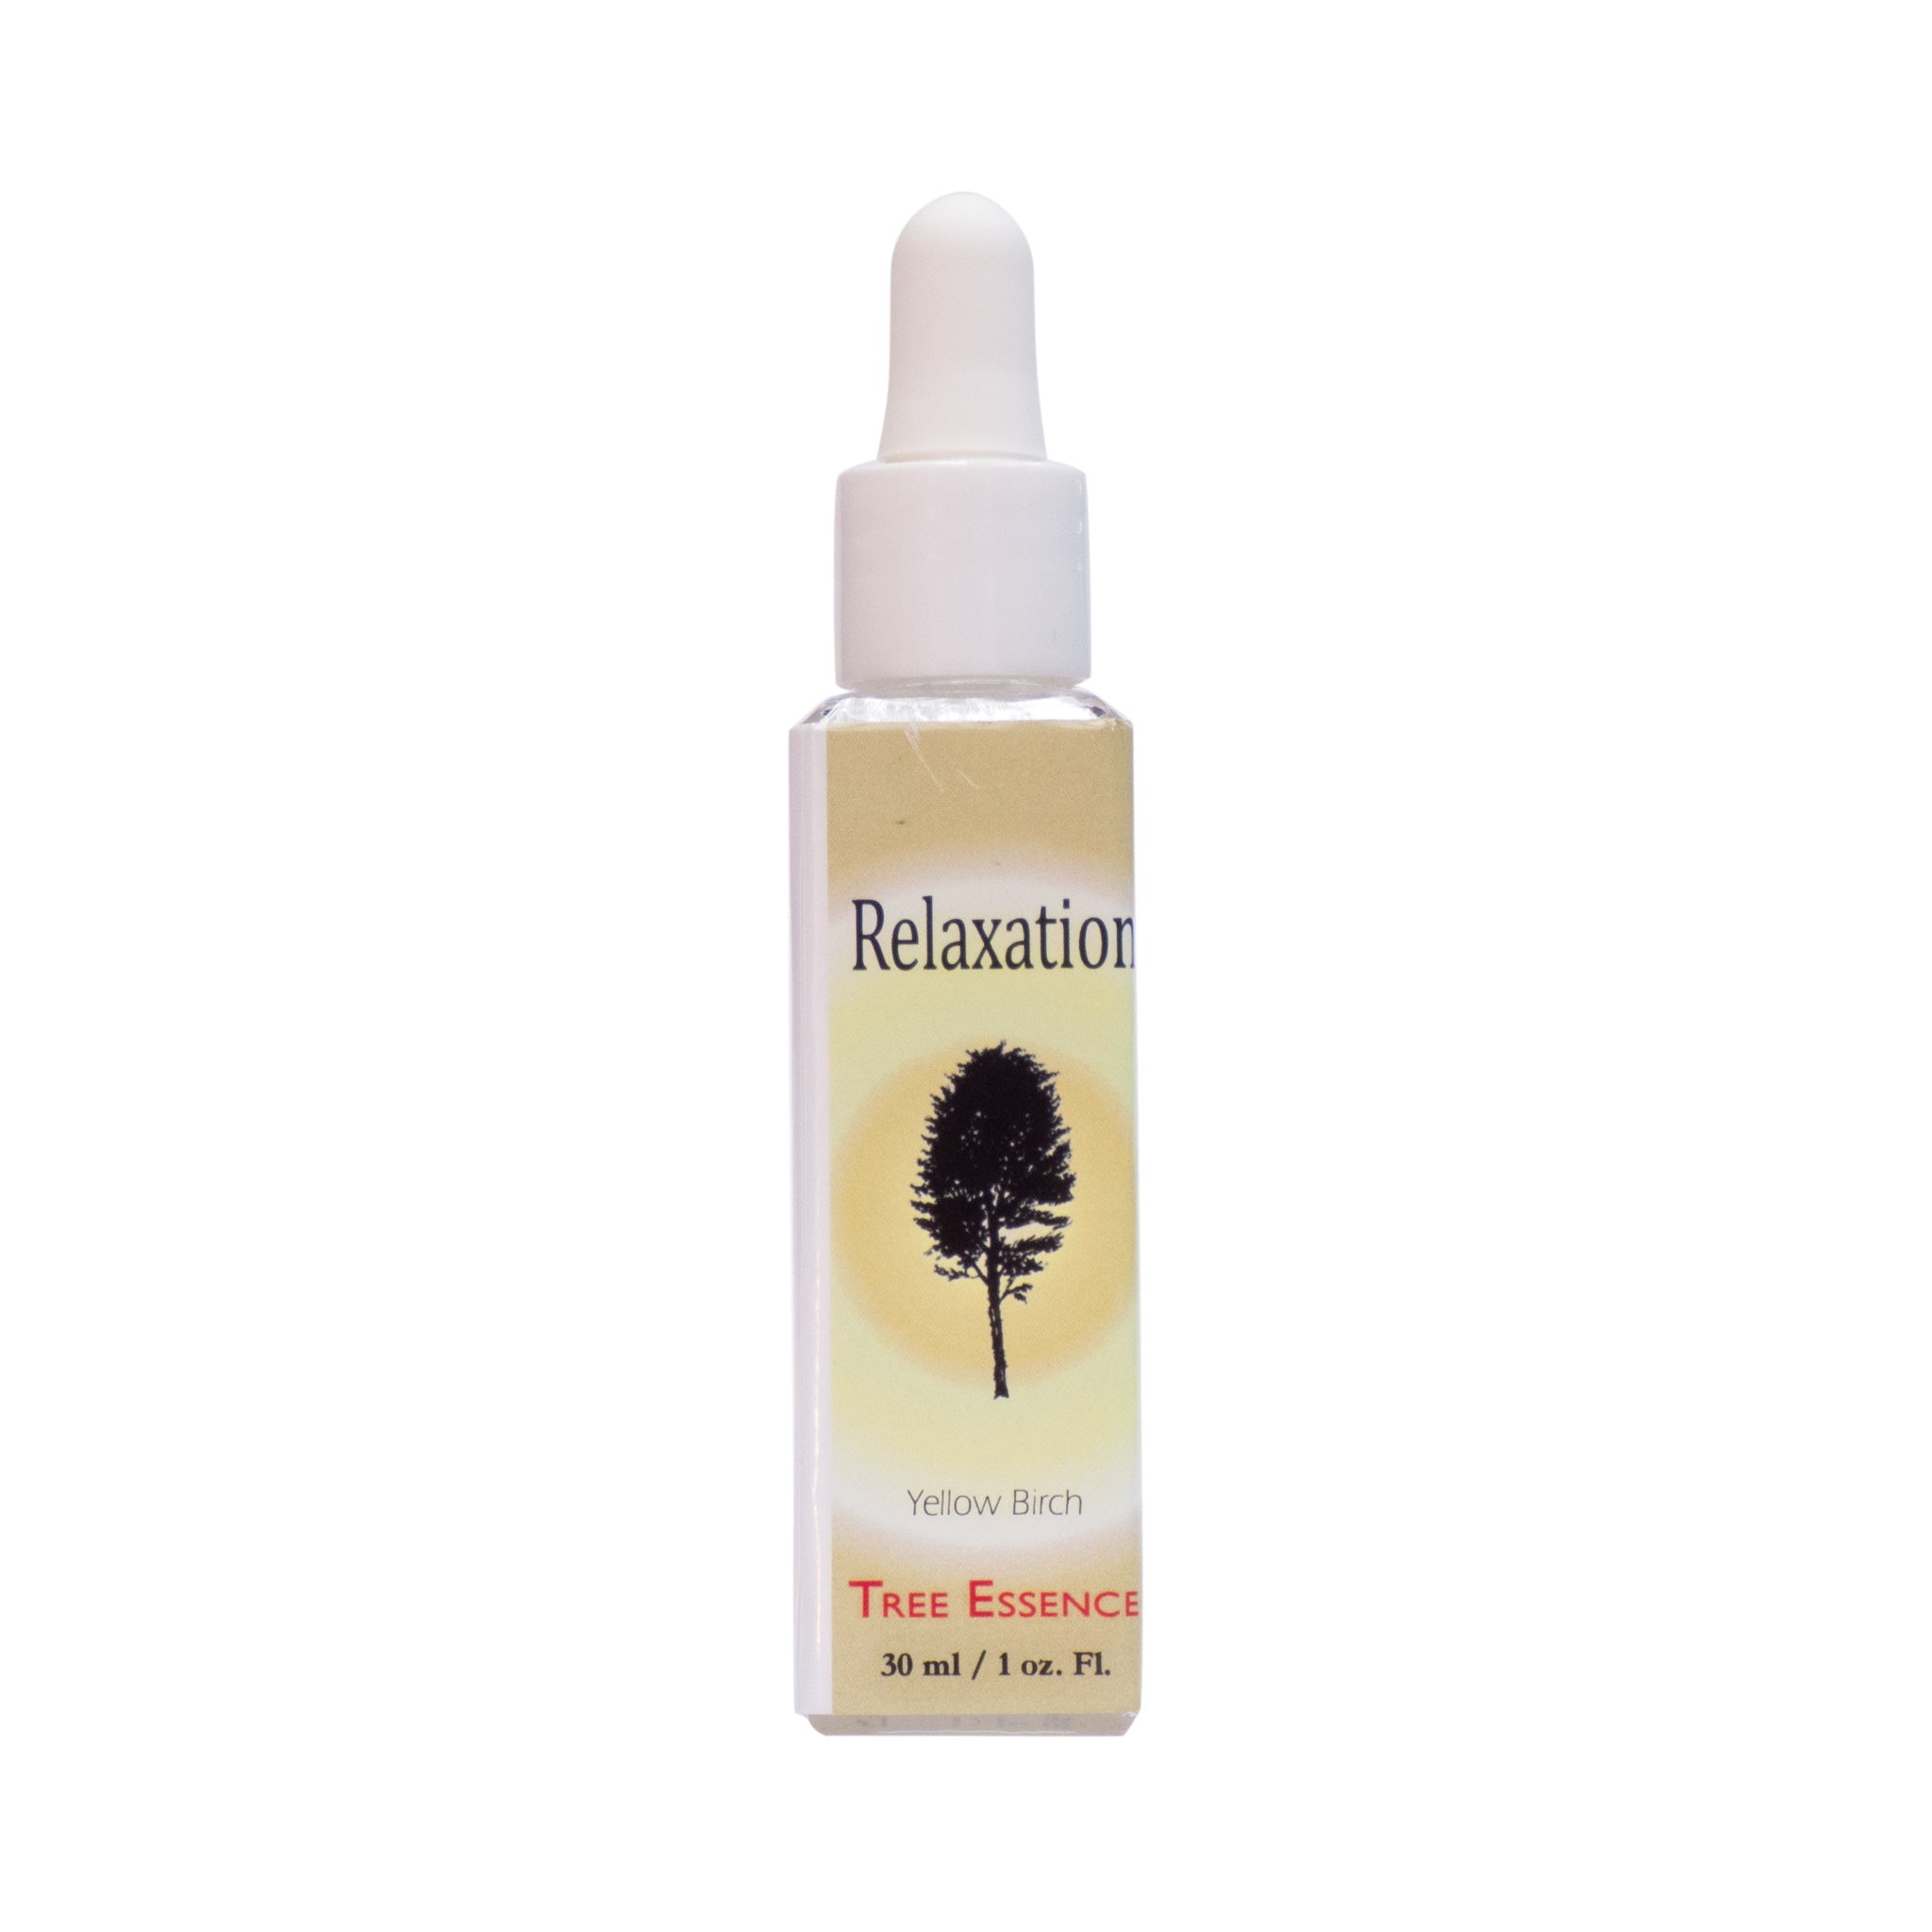 Relaxation Essence from Yellow Birch